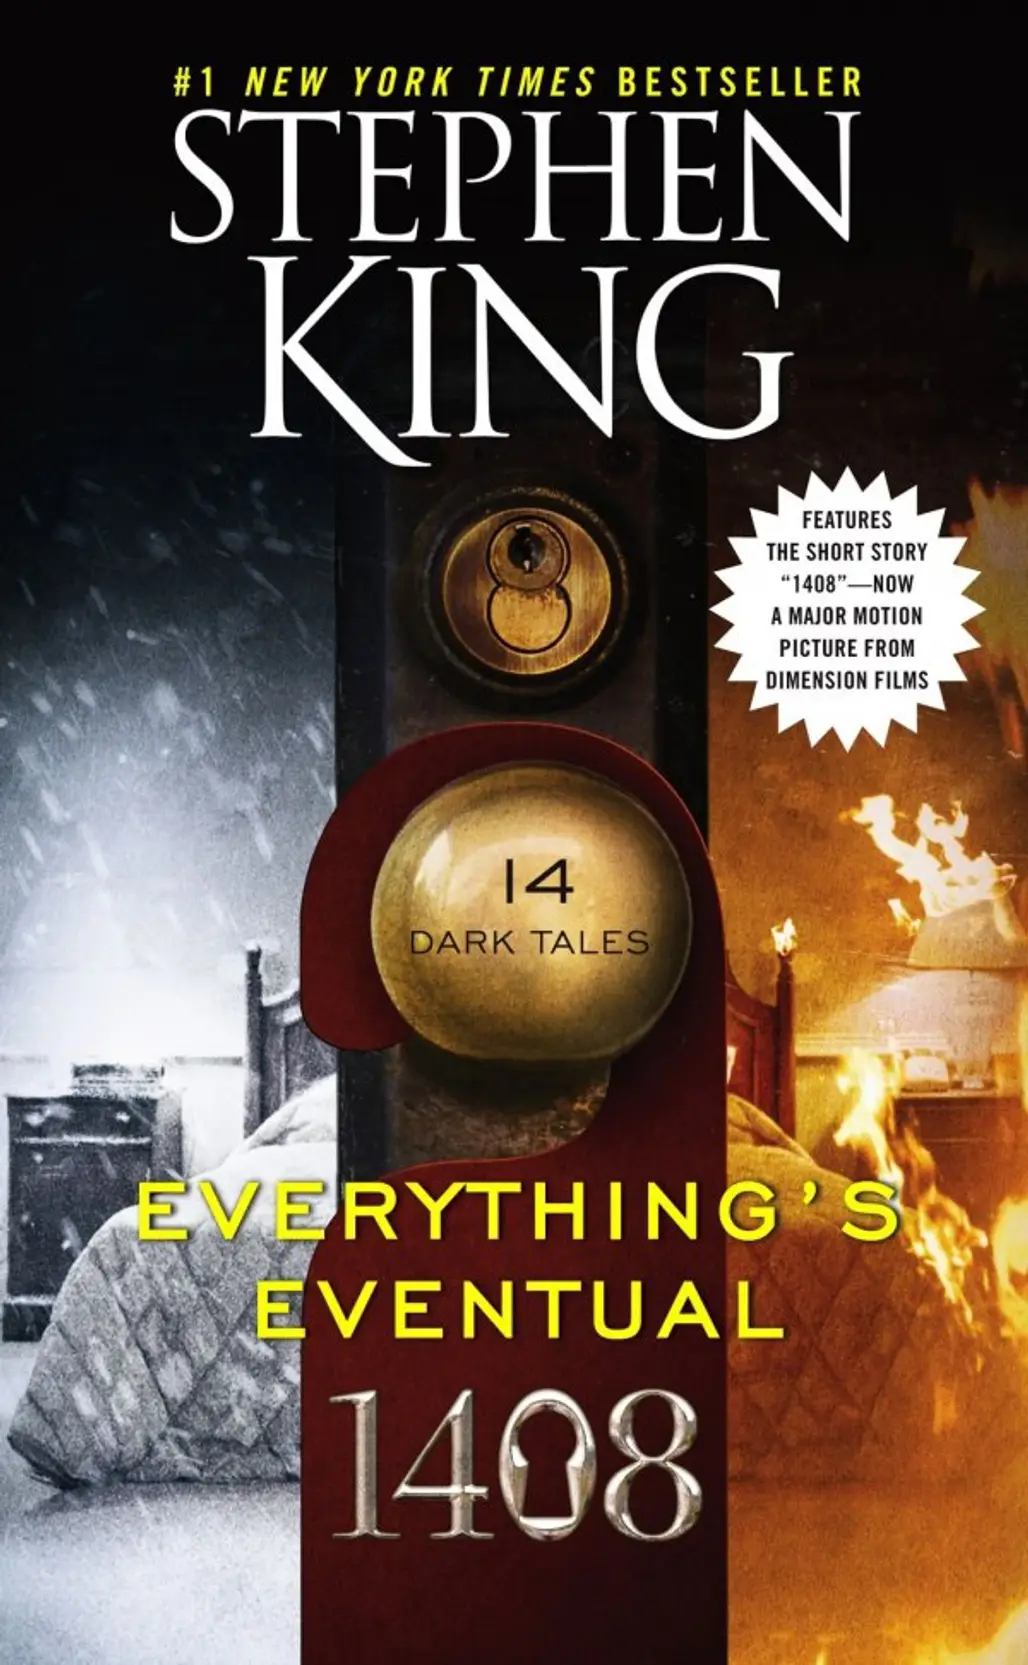 Everything’s Evenutal by Stephen King